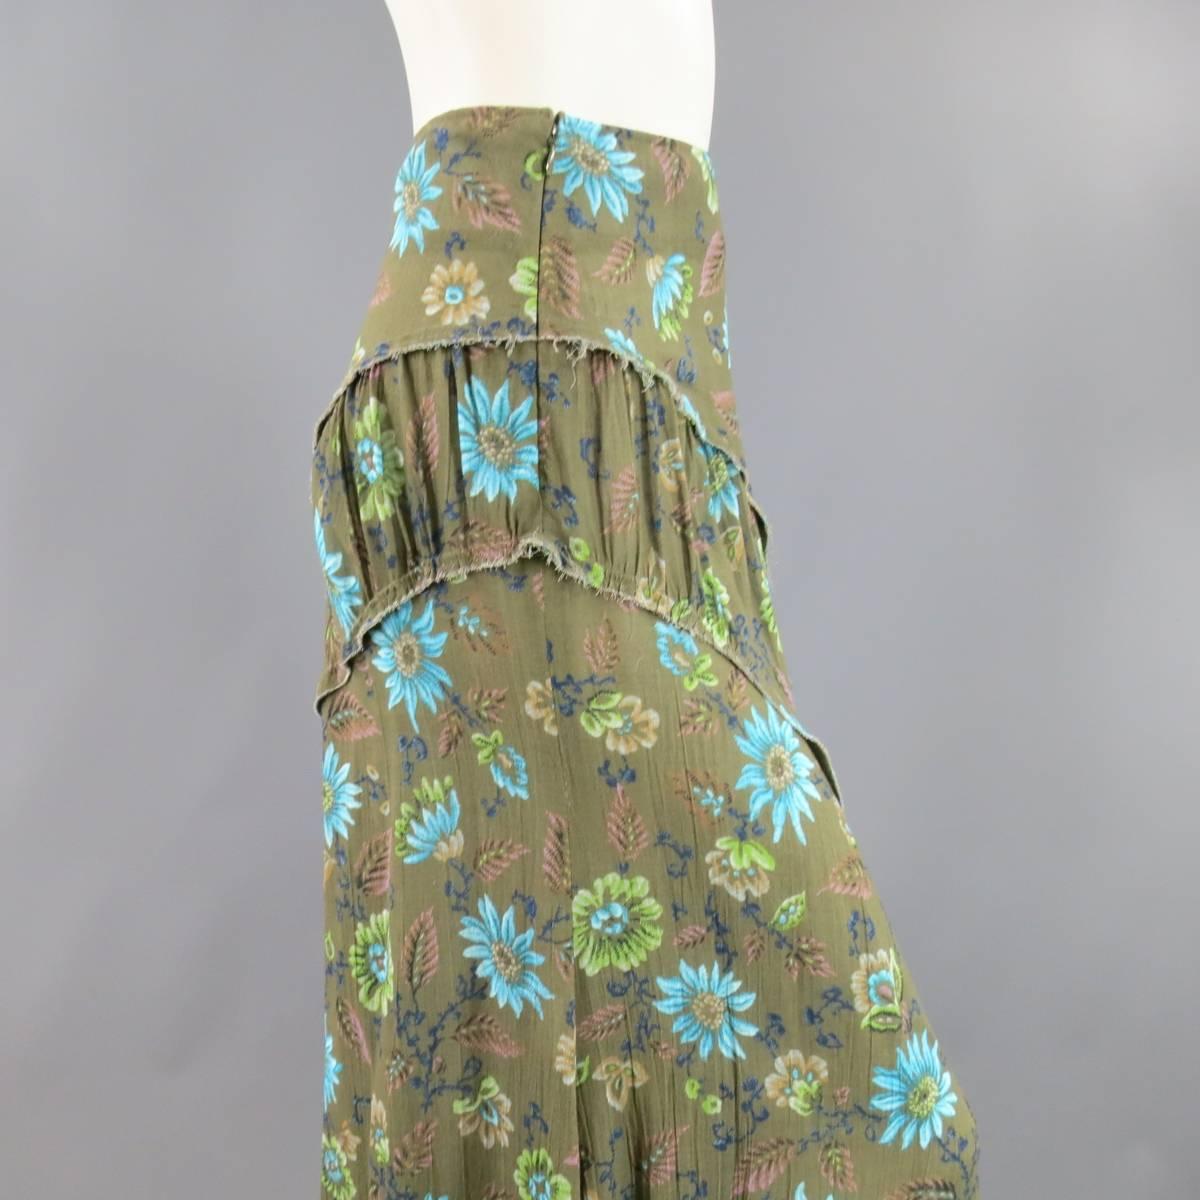 This rare Y'S by YOHJI YAMAMOTO maxi skirt comes in a light weight olive green textured rayon with blue and brown floral and leaf print and features diagonal curved panels with raw edges and gathering. Made in Japan.
 
Excellent Pre-Owned